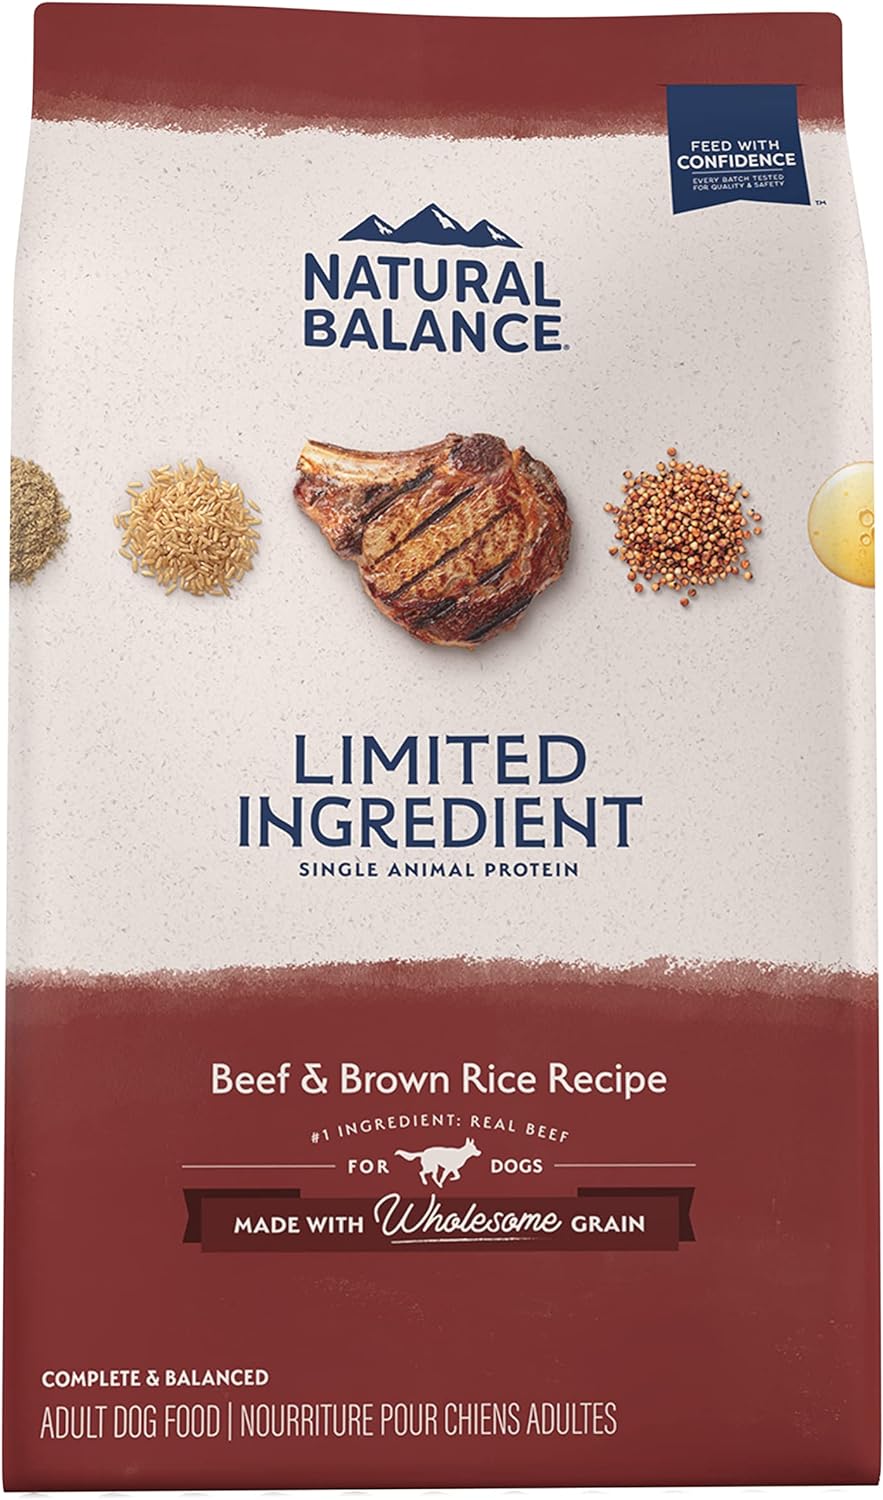 Natural Balance Dry Dog Food with Few Ingredients